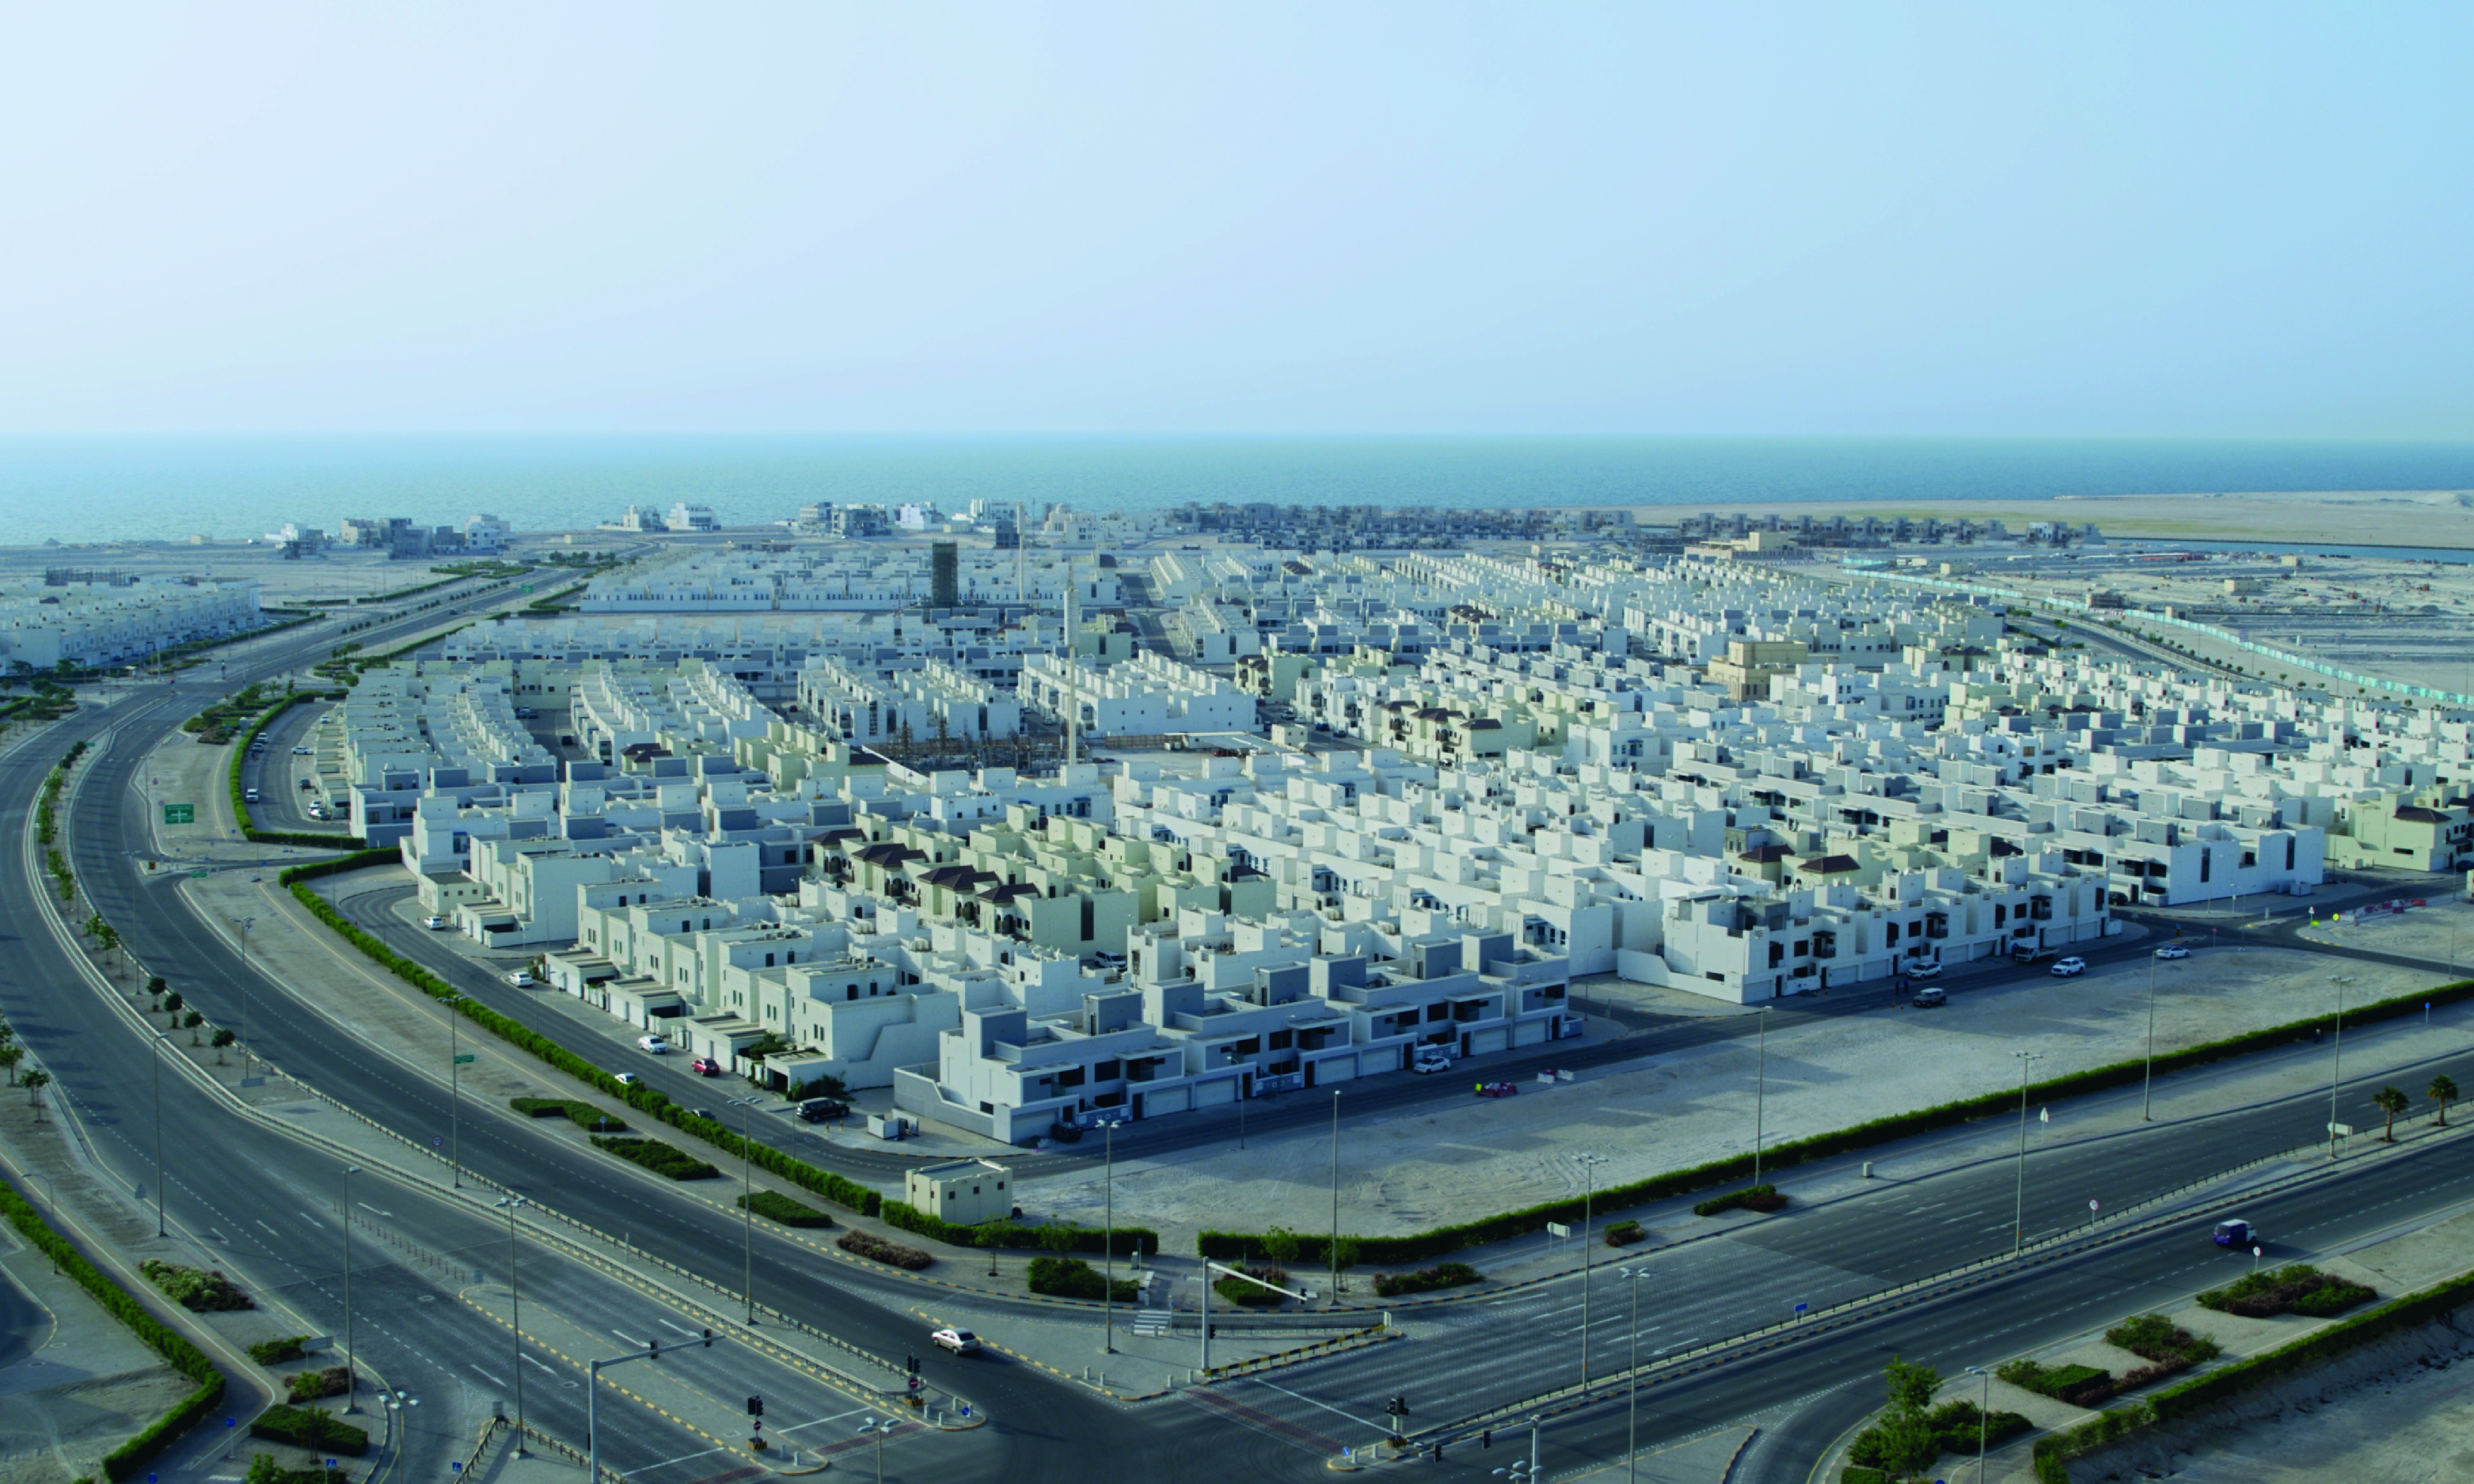 Diyar Al Muharraq Announces the Completion of Over 90% of the Infrastructure Works at the Southern Island